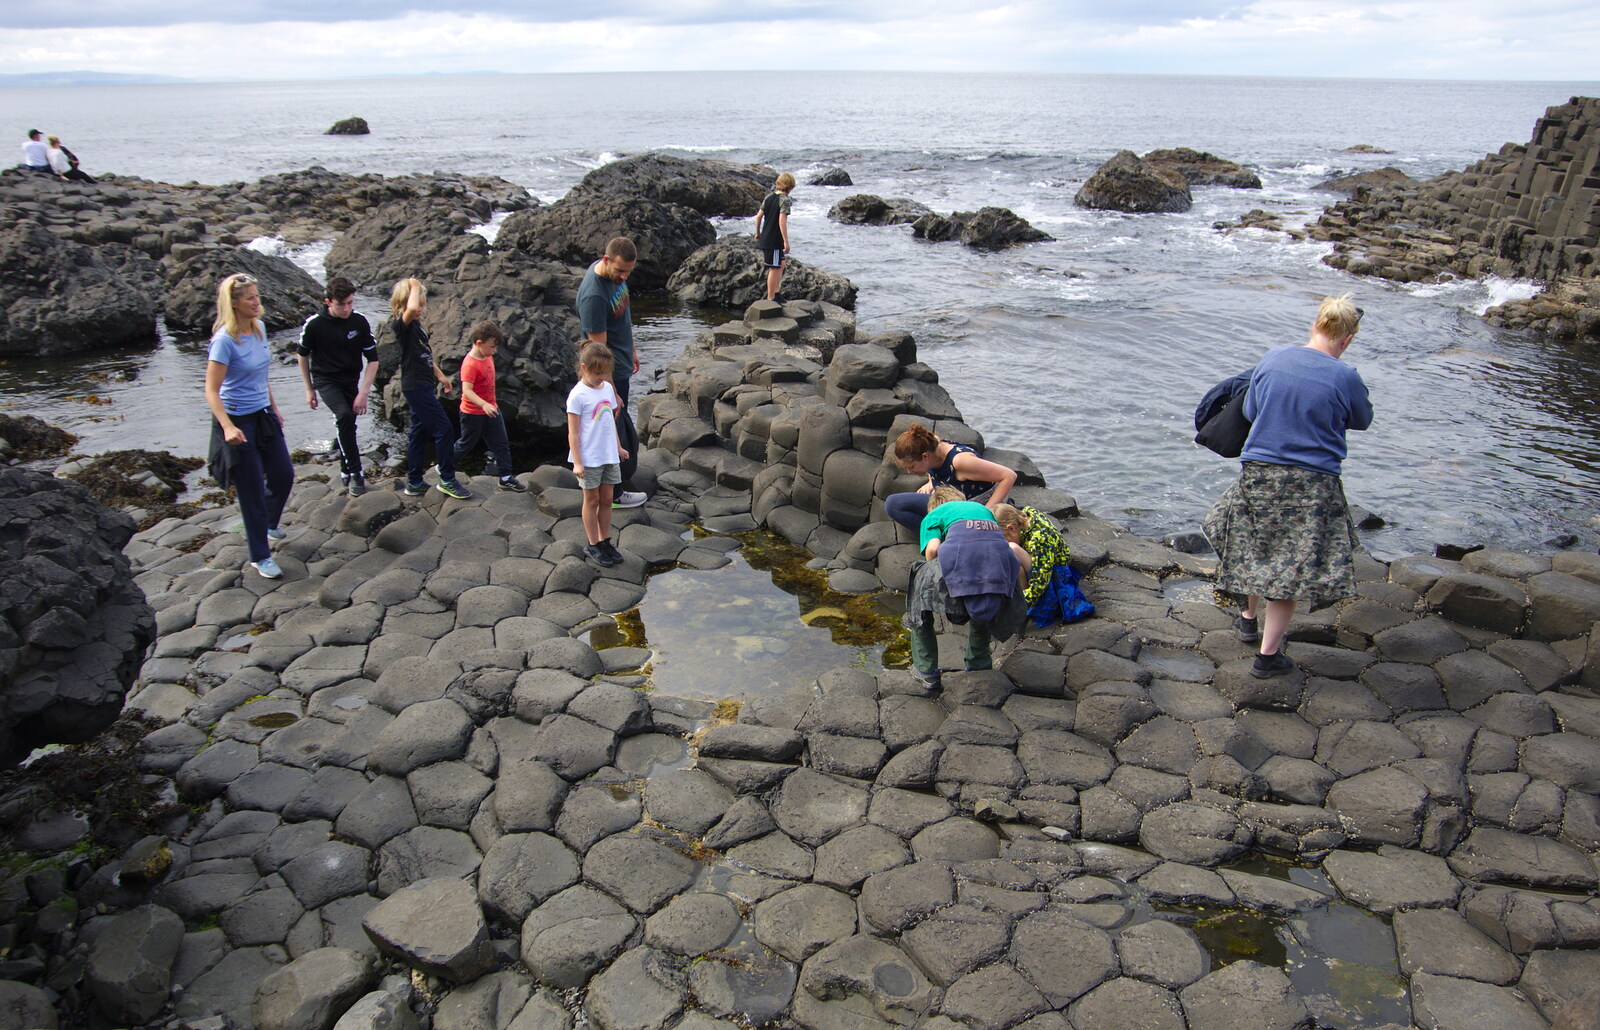 The boys look in a rock pool from The Giant's Causeway, Bushmills, County Antrim, Northern Ireland - 14th August 2019